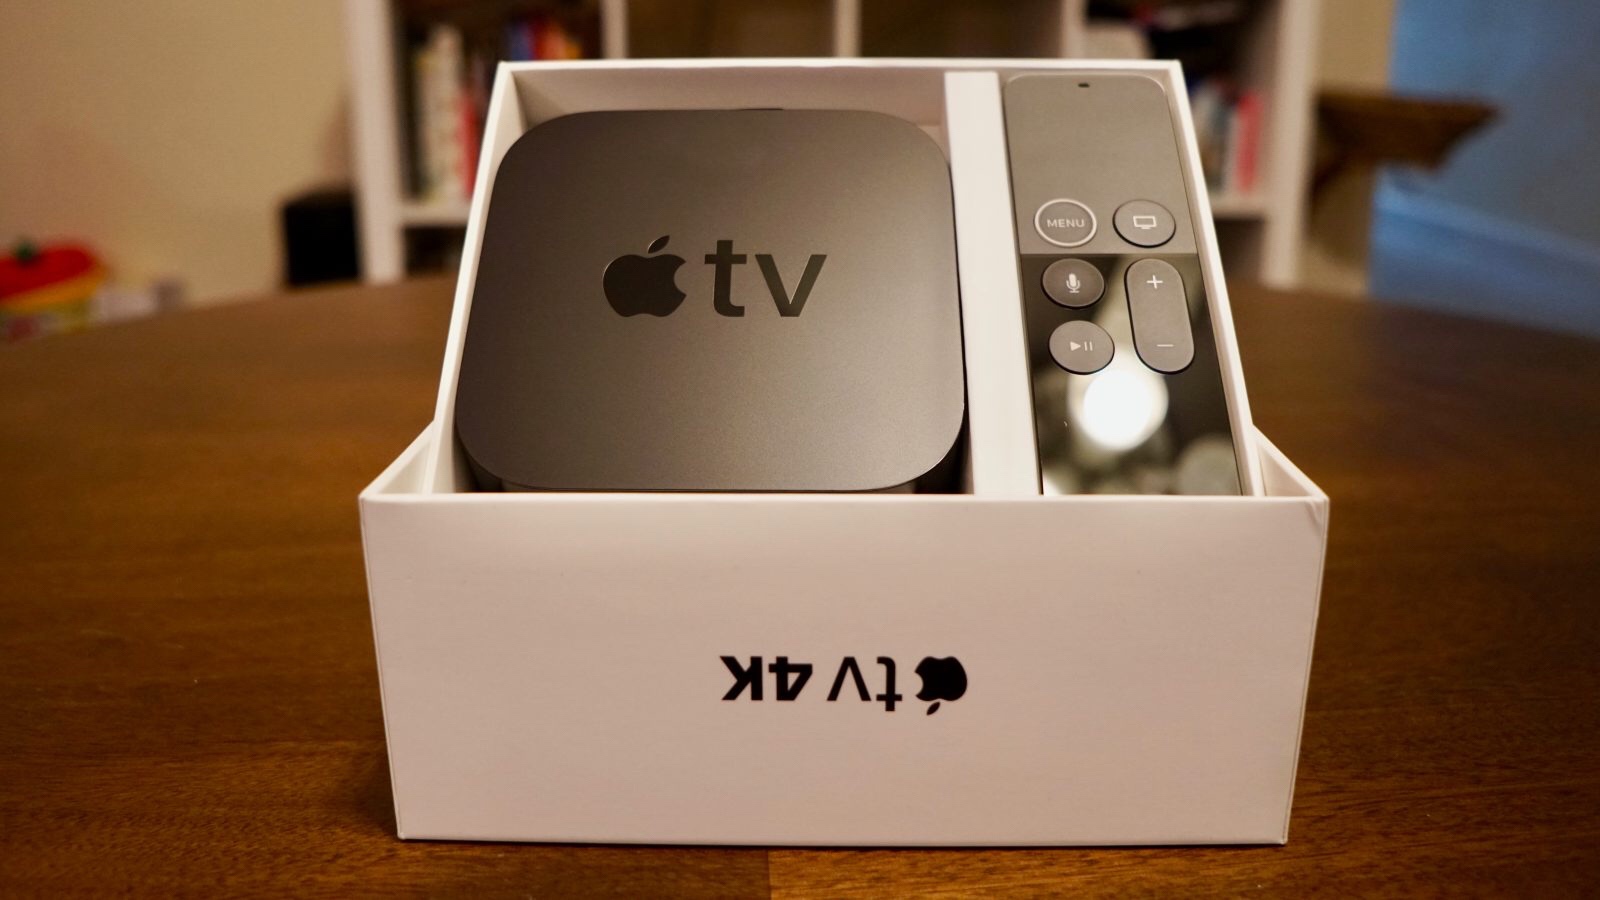 Apple TV 4K sells out on Amazon within hours of being on sale